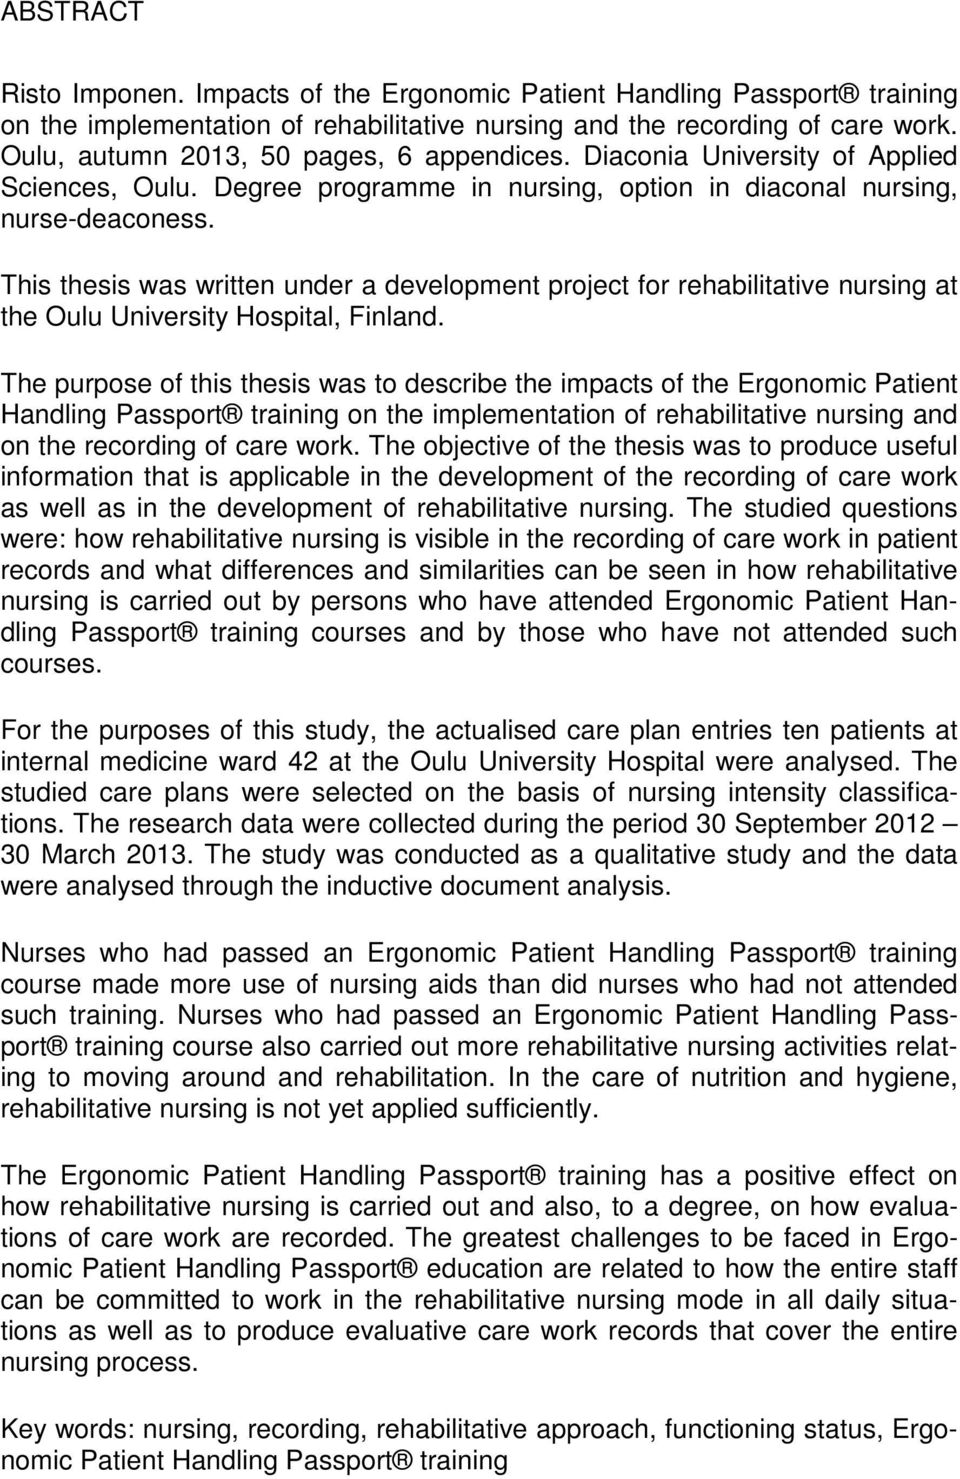 This thesis was written under a development project for rehabilitative nursing at the Oulu University Hospital, Finland.